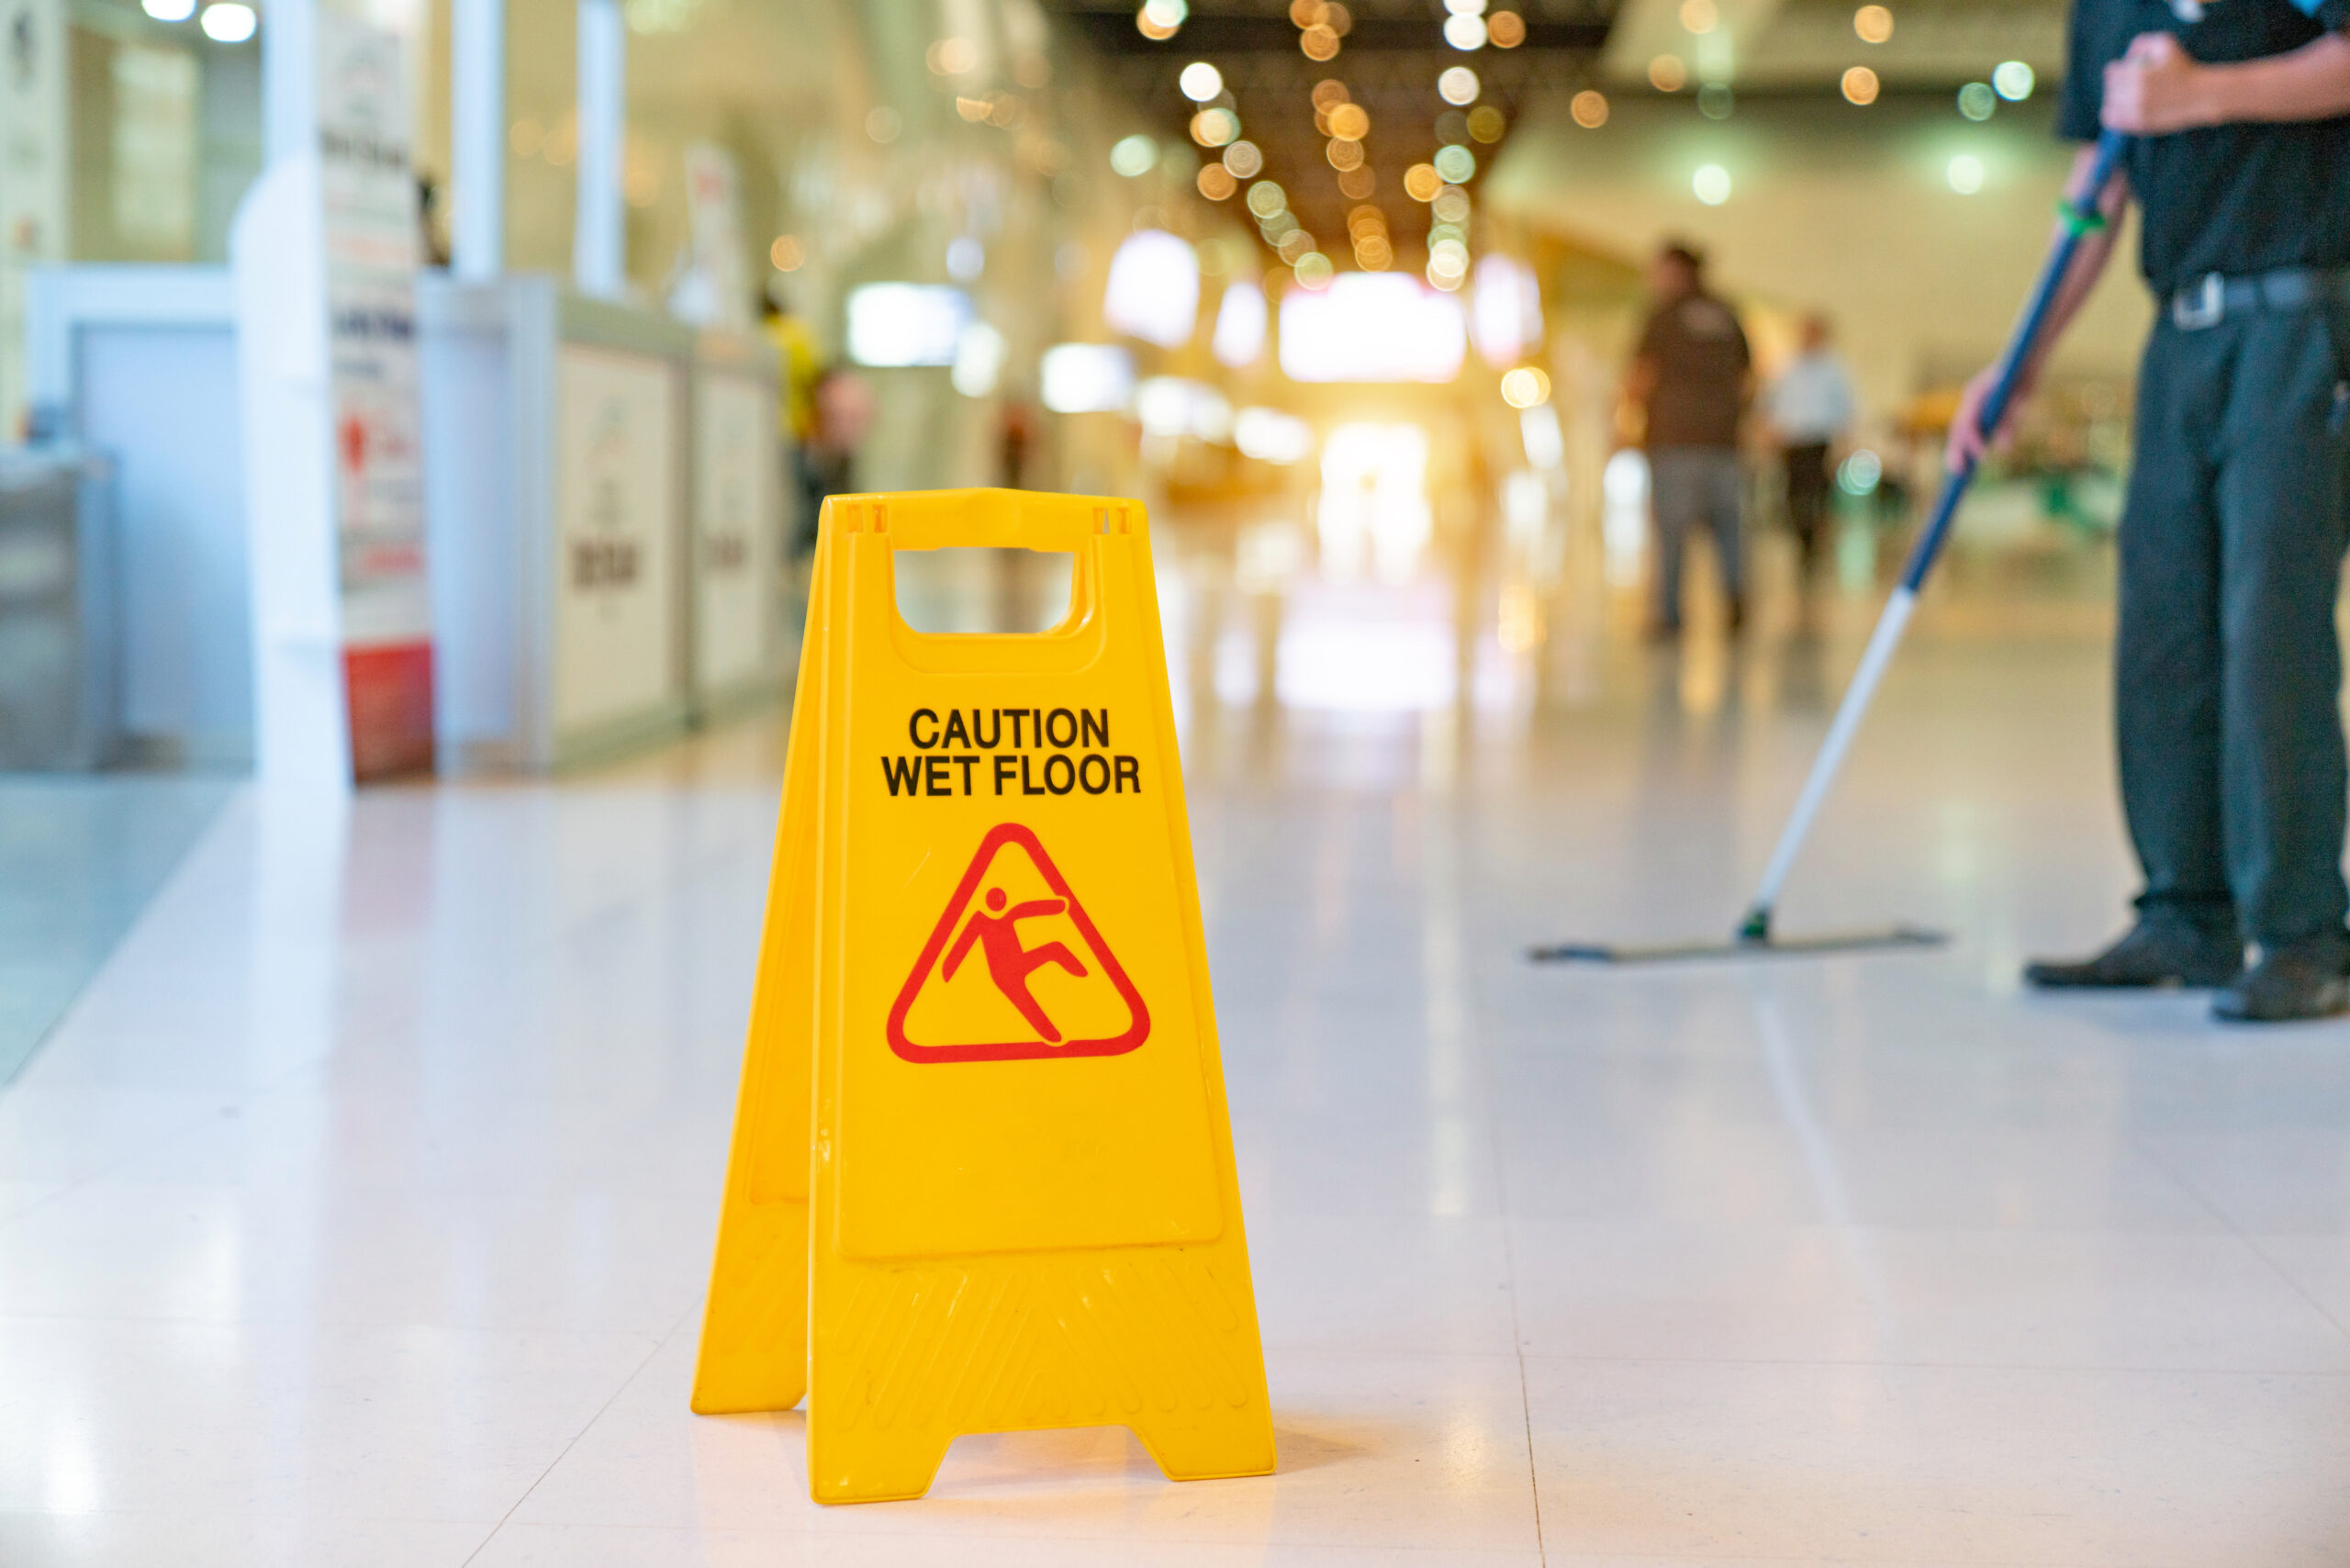 A Business Facility’s Liability for a Slip and Fall Accident